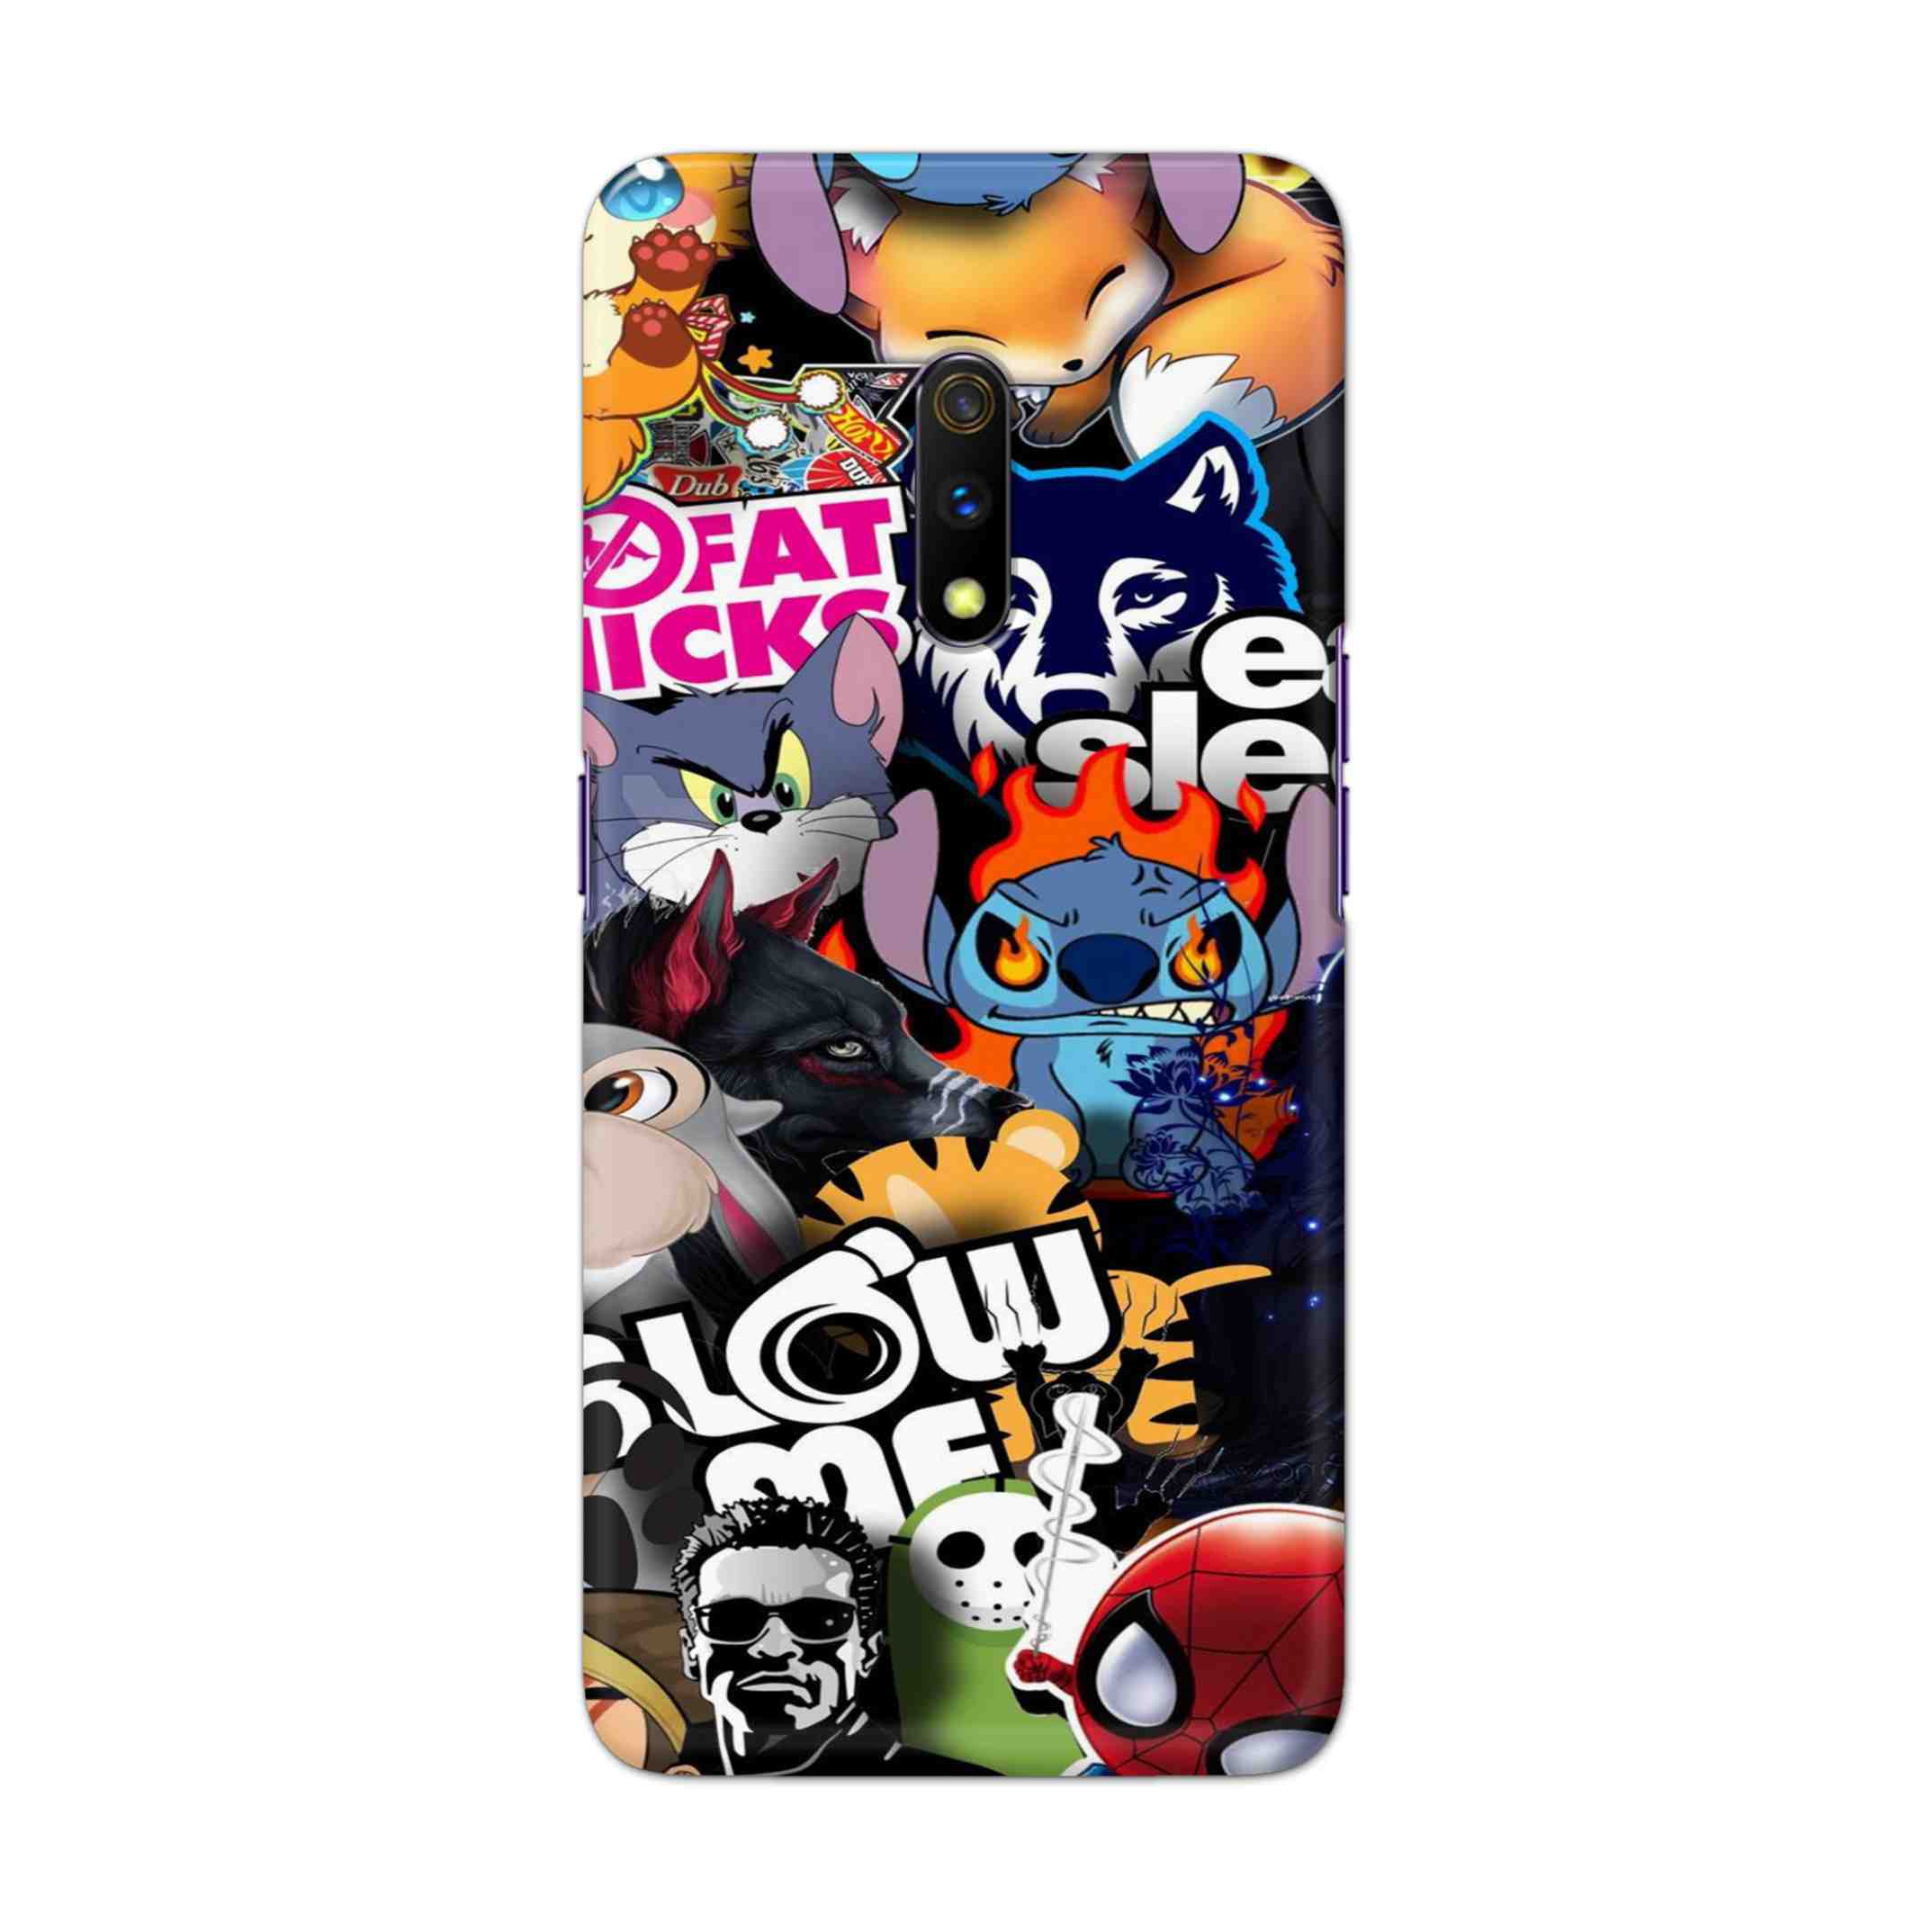 Buy Blow Me Hard Back Mobile Phone Case Cover For Oppo Realme X Online